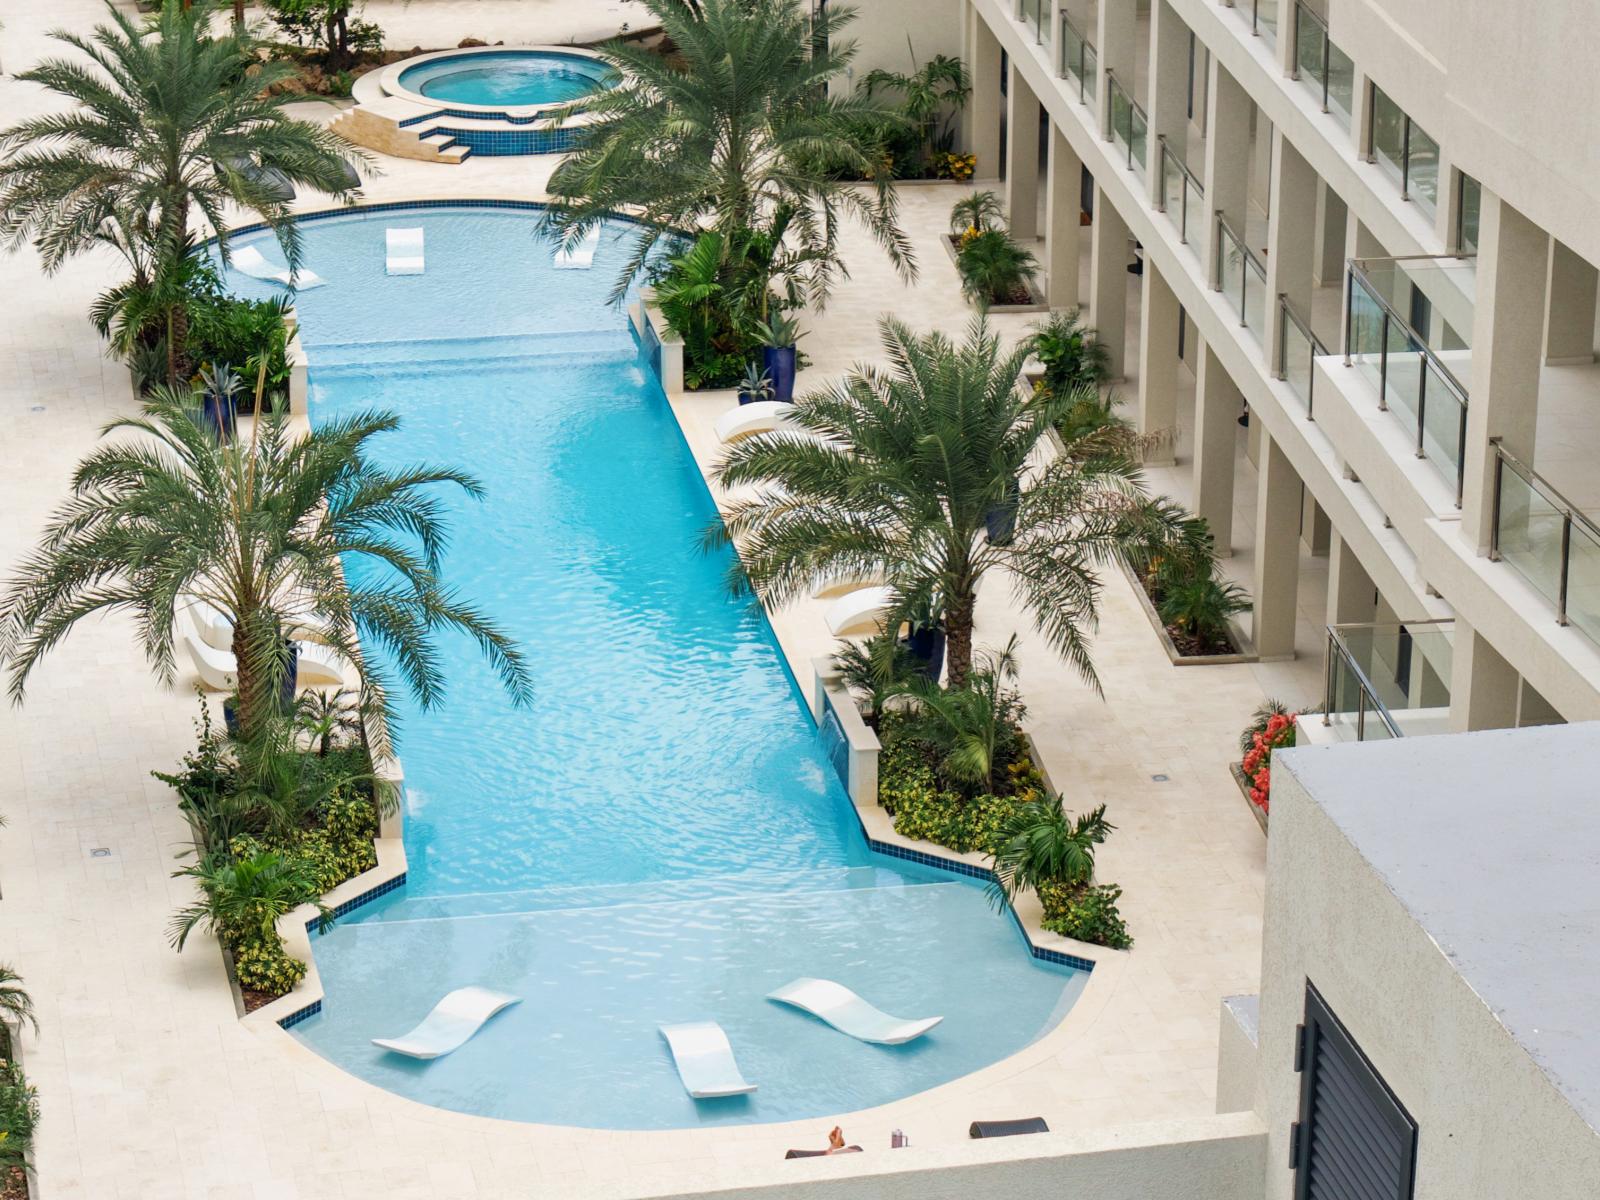 Dive into the lap of luxury – an aerial view of our serene pool oasis.